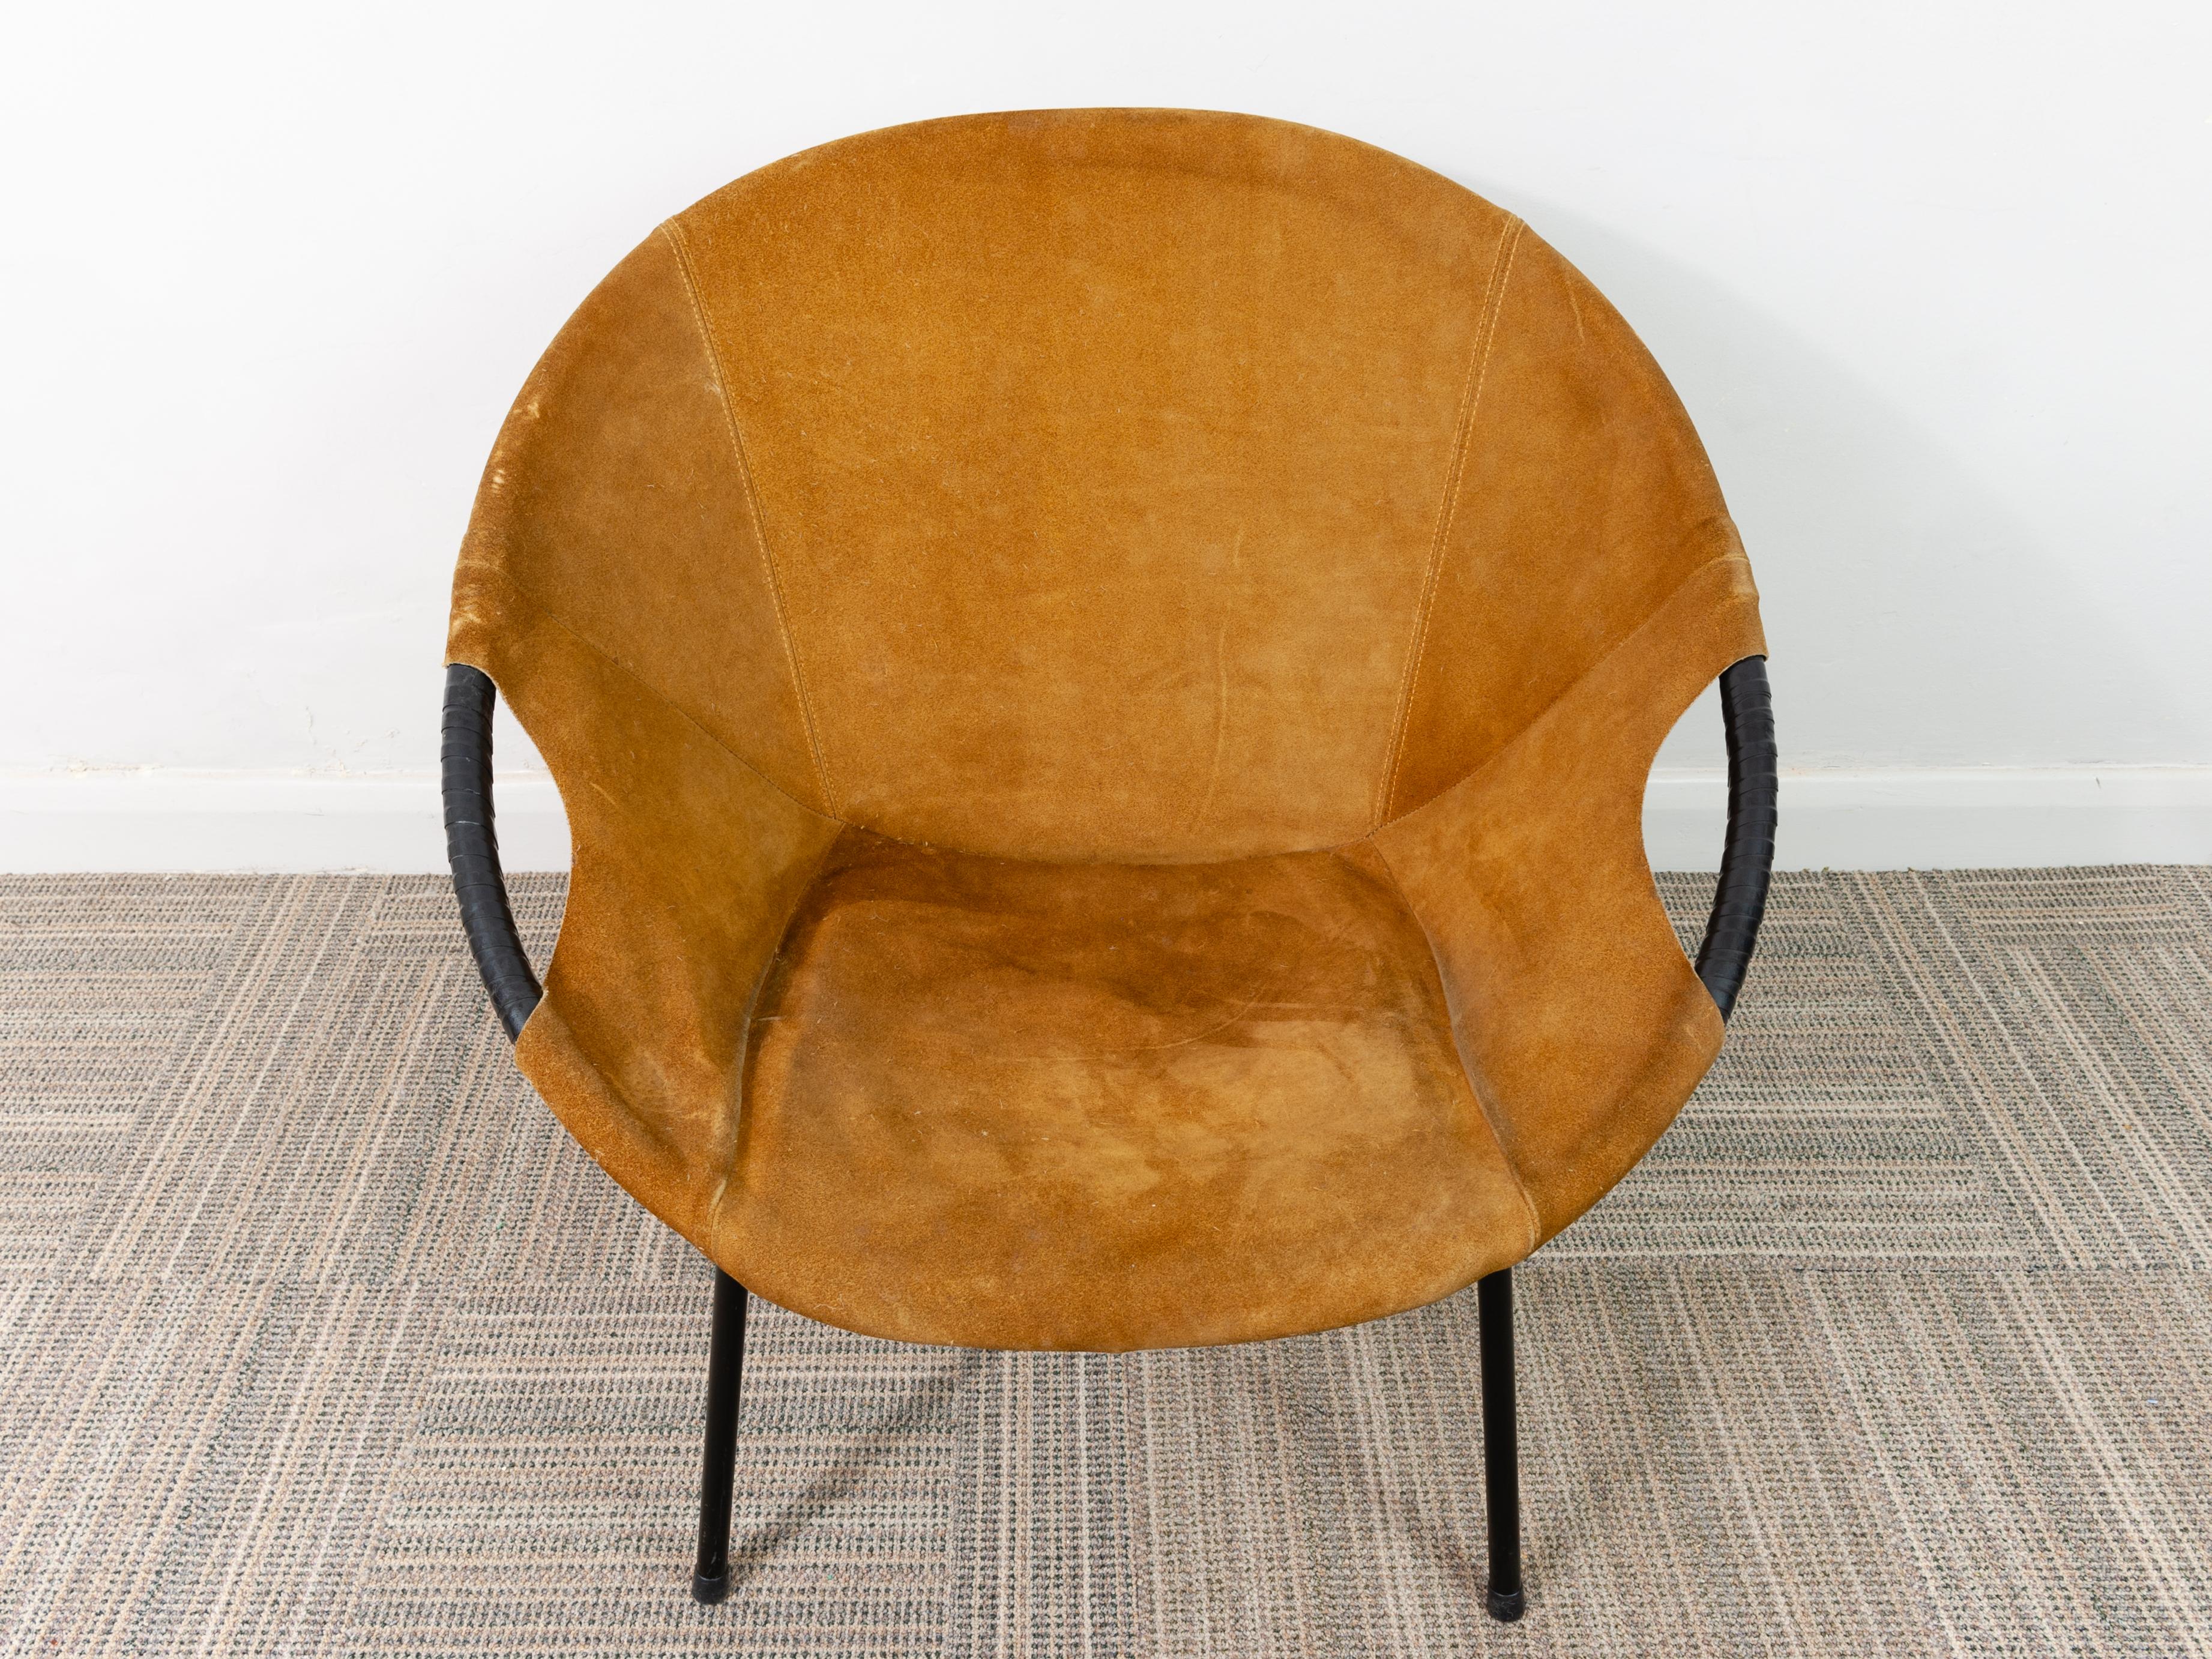 1960s Suede Circle Balloon Chair by Lusch Erzeugnis for Lusch & Co. 1